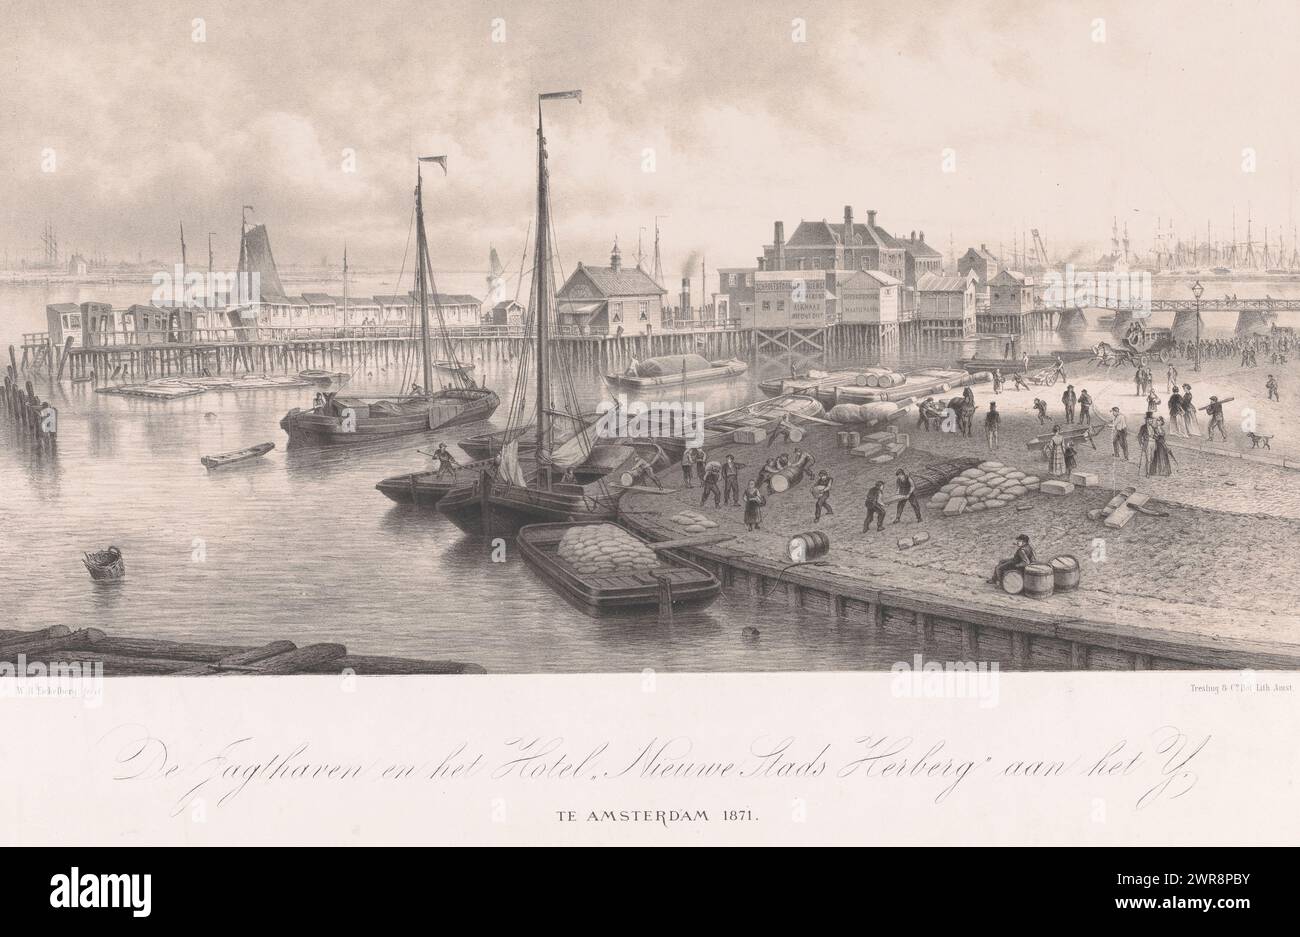 View of the Nieuwe Stadsherberg in Amsterdam, De Jagthaven and the Hotel 'Nieuwe Stads Herberg' on the IJ (title on object), print maker: Willem Hendrik Eickelberg, after design by: Willem Hendrik Eickelberg, printer: Tresling & Comp., Amsterdam, 1871, paper, height 537 mm × width 665 mm, print Stock Photo